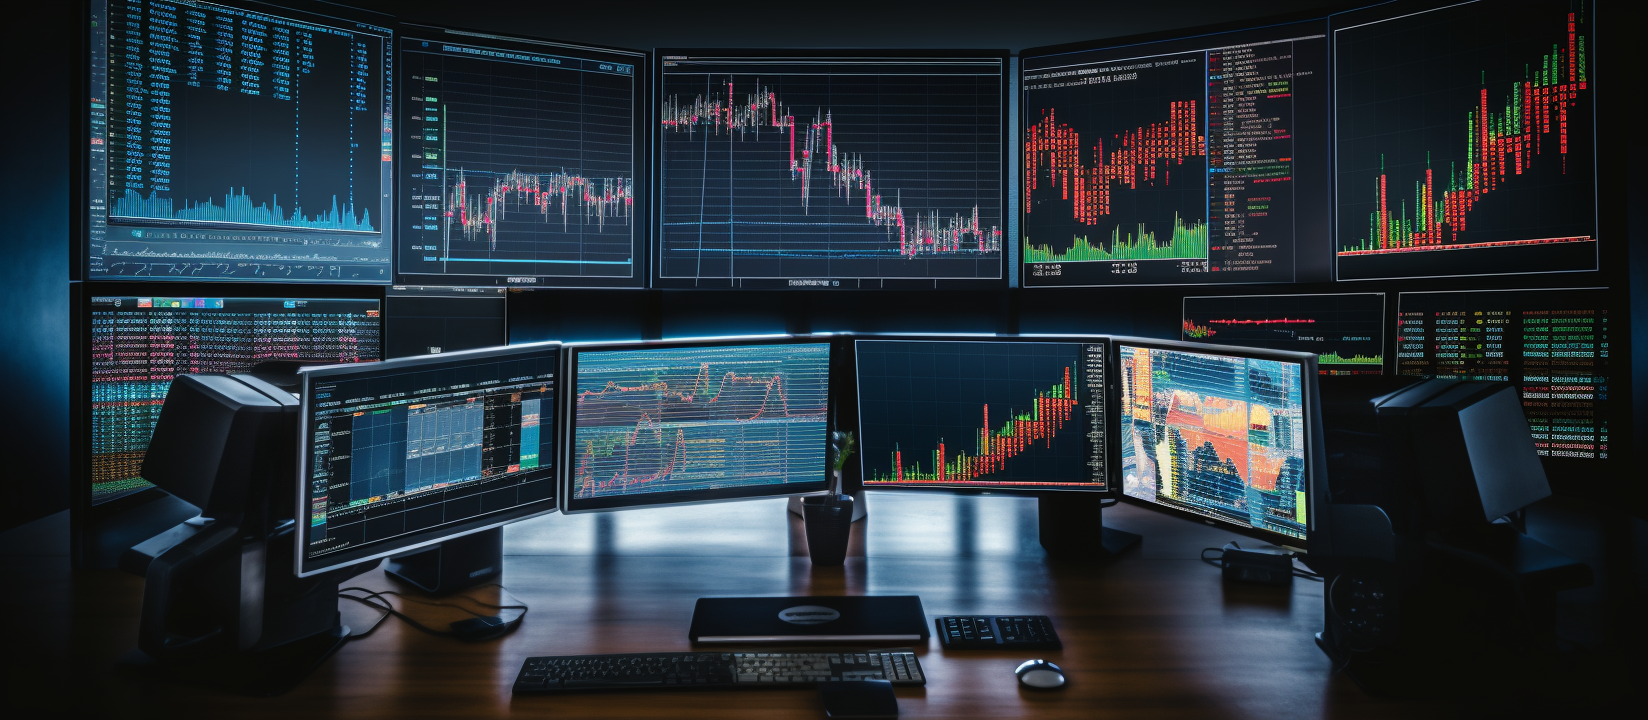 Effective backtesting analysis for trading strategies